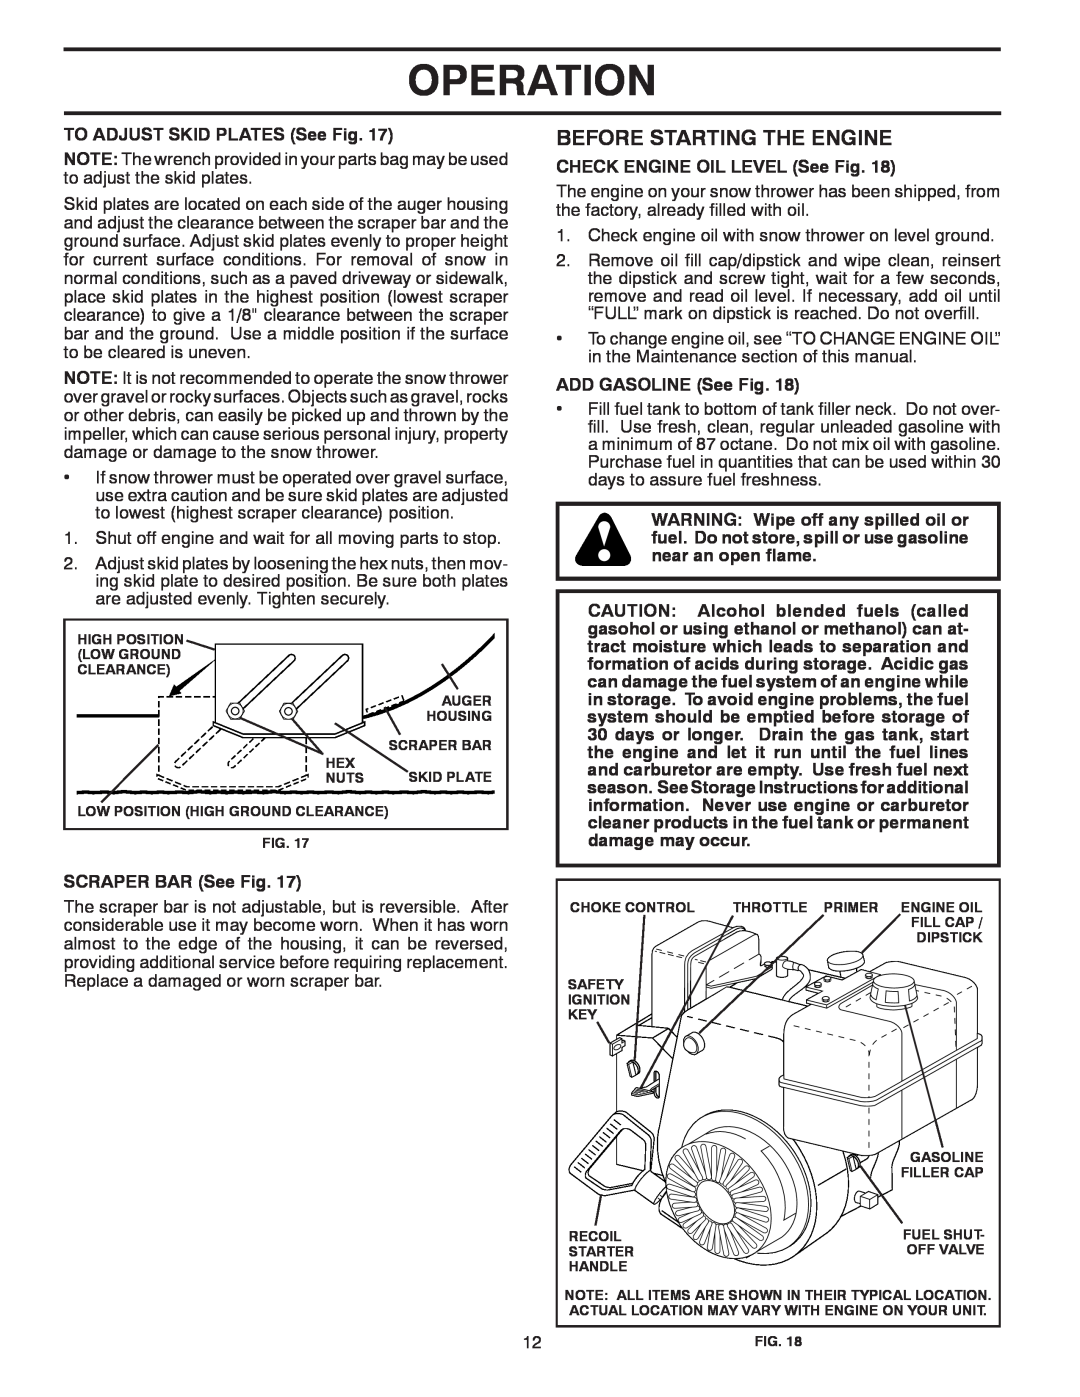 Poulan 418971 Operation, Before Starting The Engine, TO ADJUST SKID PLATES See Fig, CHECK ENGINE OIL LEVEL See Fig 